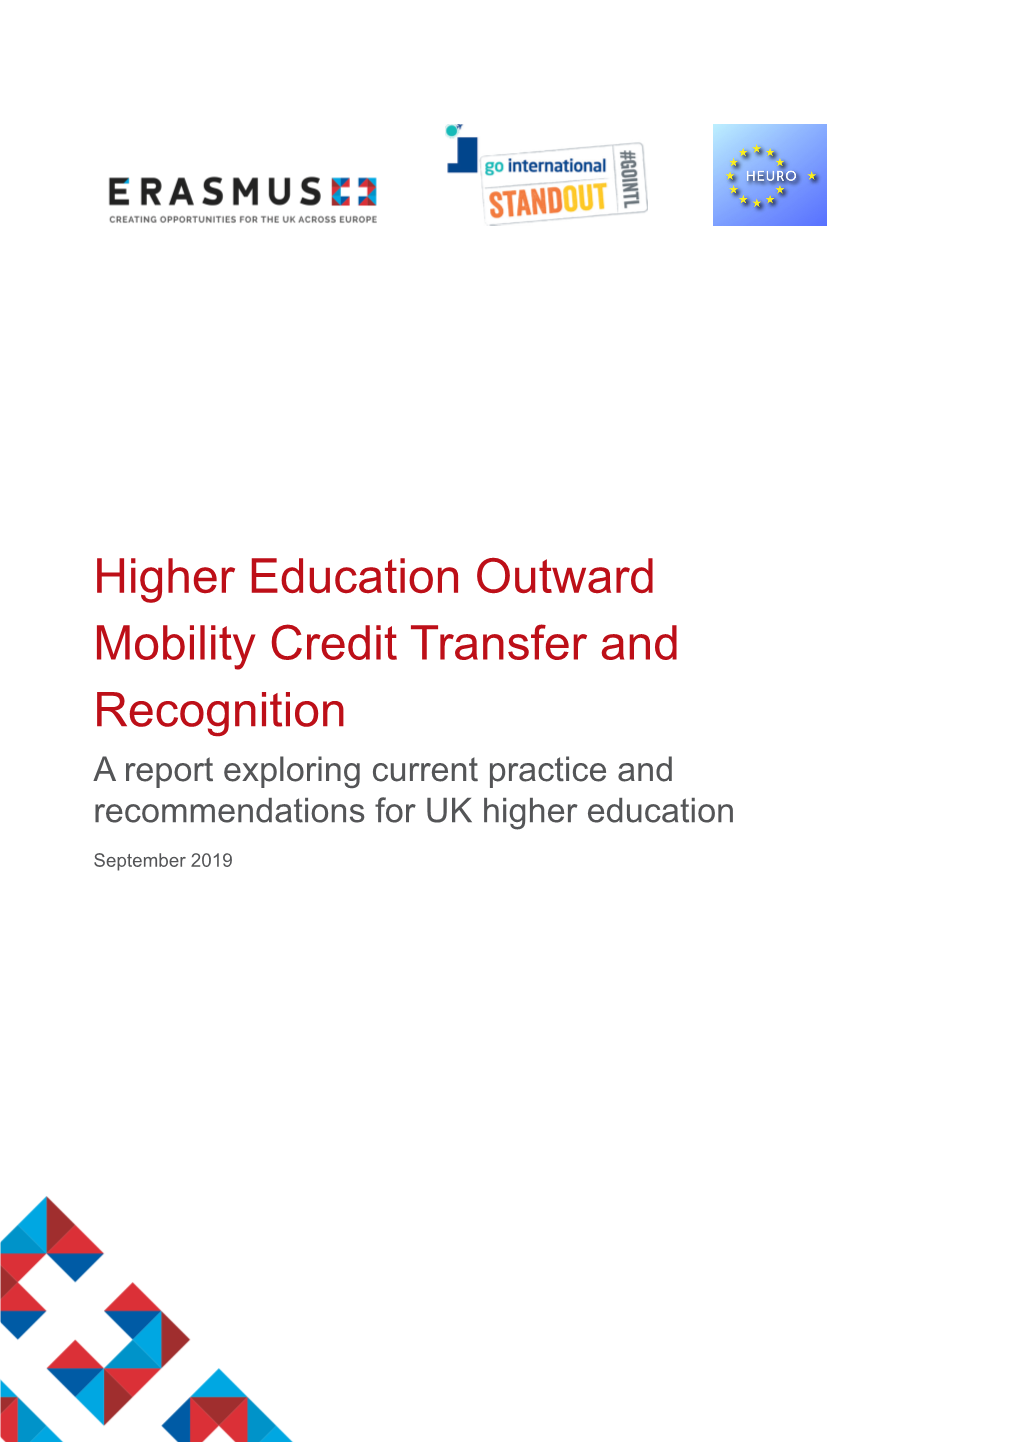 Higher Education Outward Mobility Credit Transfer and Recognition a Report Exploring Current Practice and Recommendations for UK Higher Education